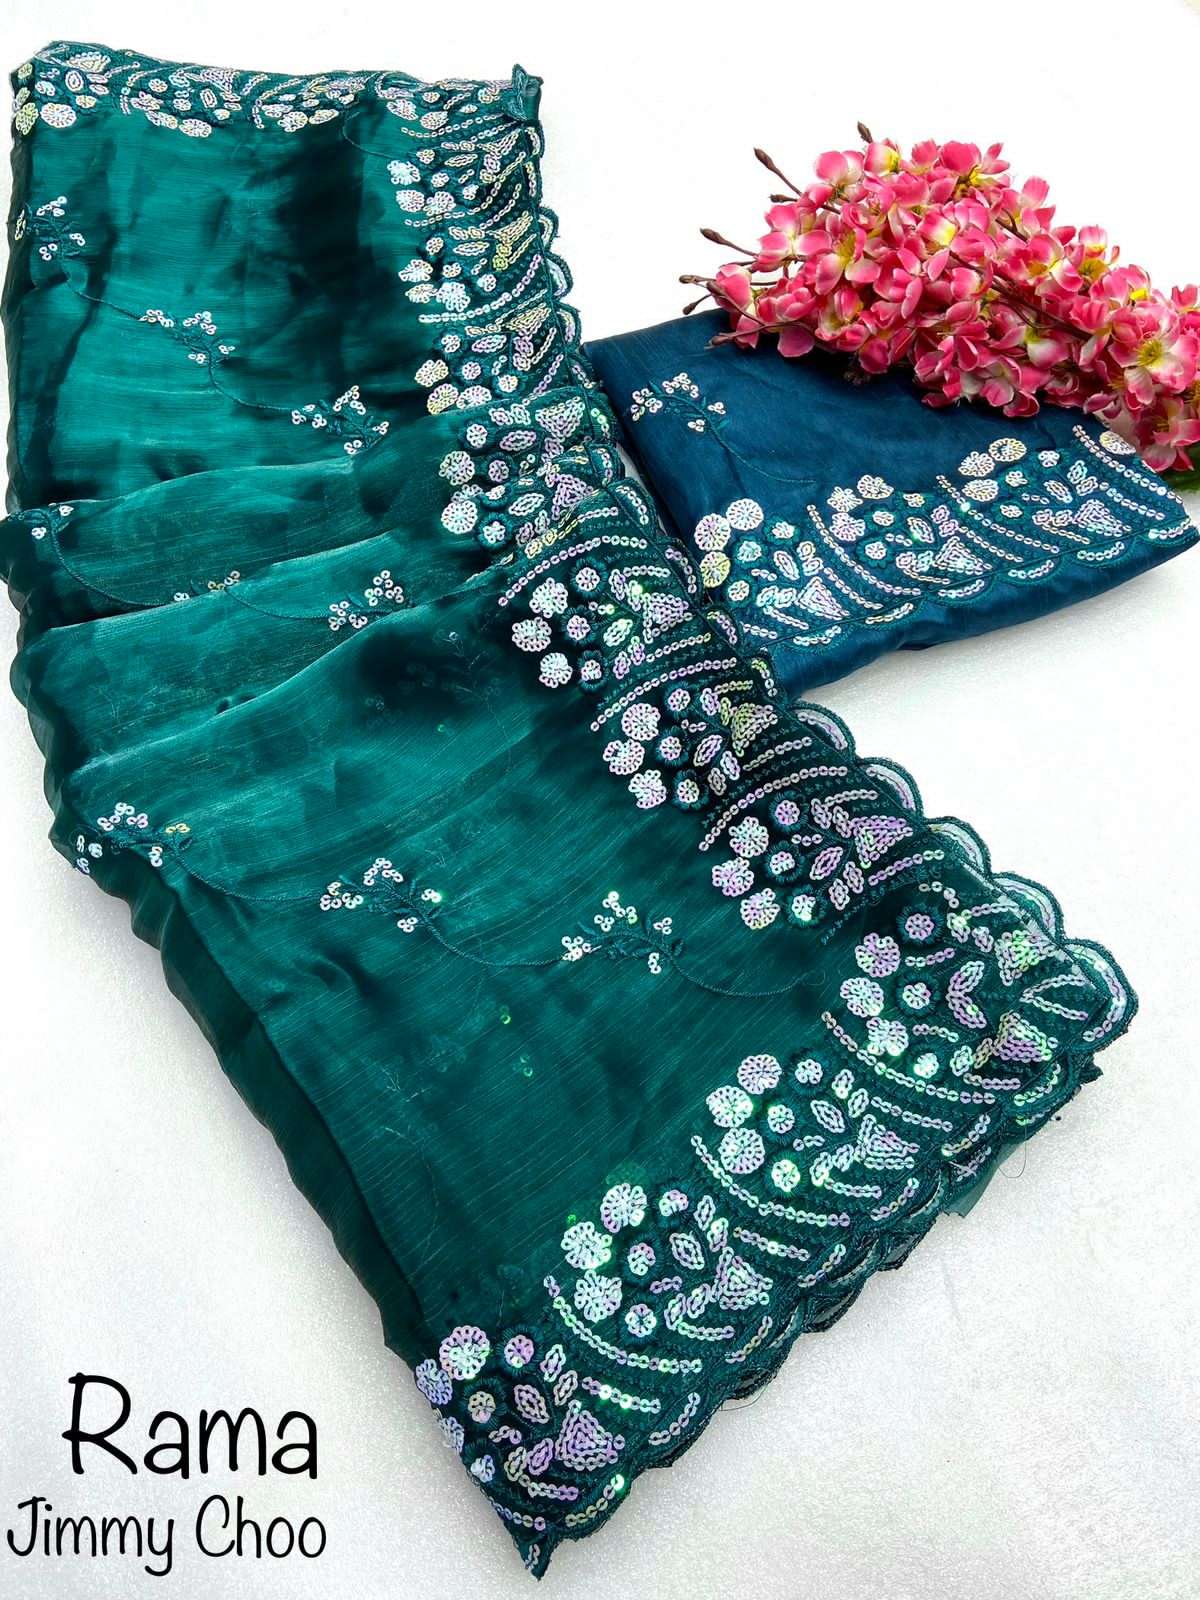 saree designer saree fabric zimmy choo saree with beautiful 5mm sequence embroidery cpallu work blouse mono diamond silk with sequence embroidery work material saree 